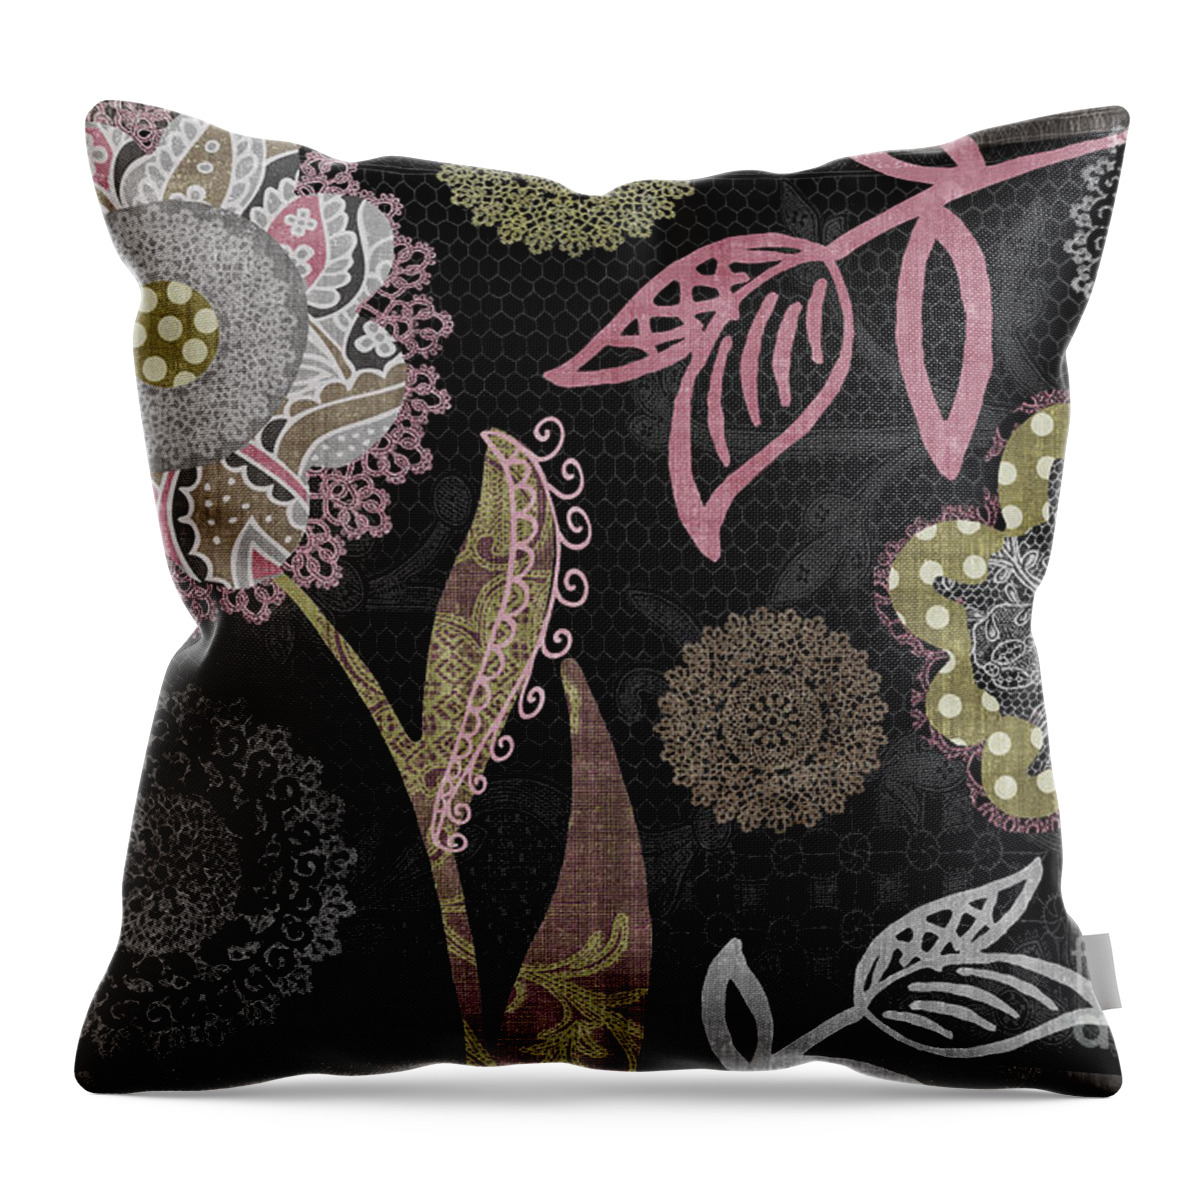 Daisy Throw Pillow featuring the painting Daisy Cartwheels by Mindy Sommers